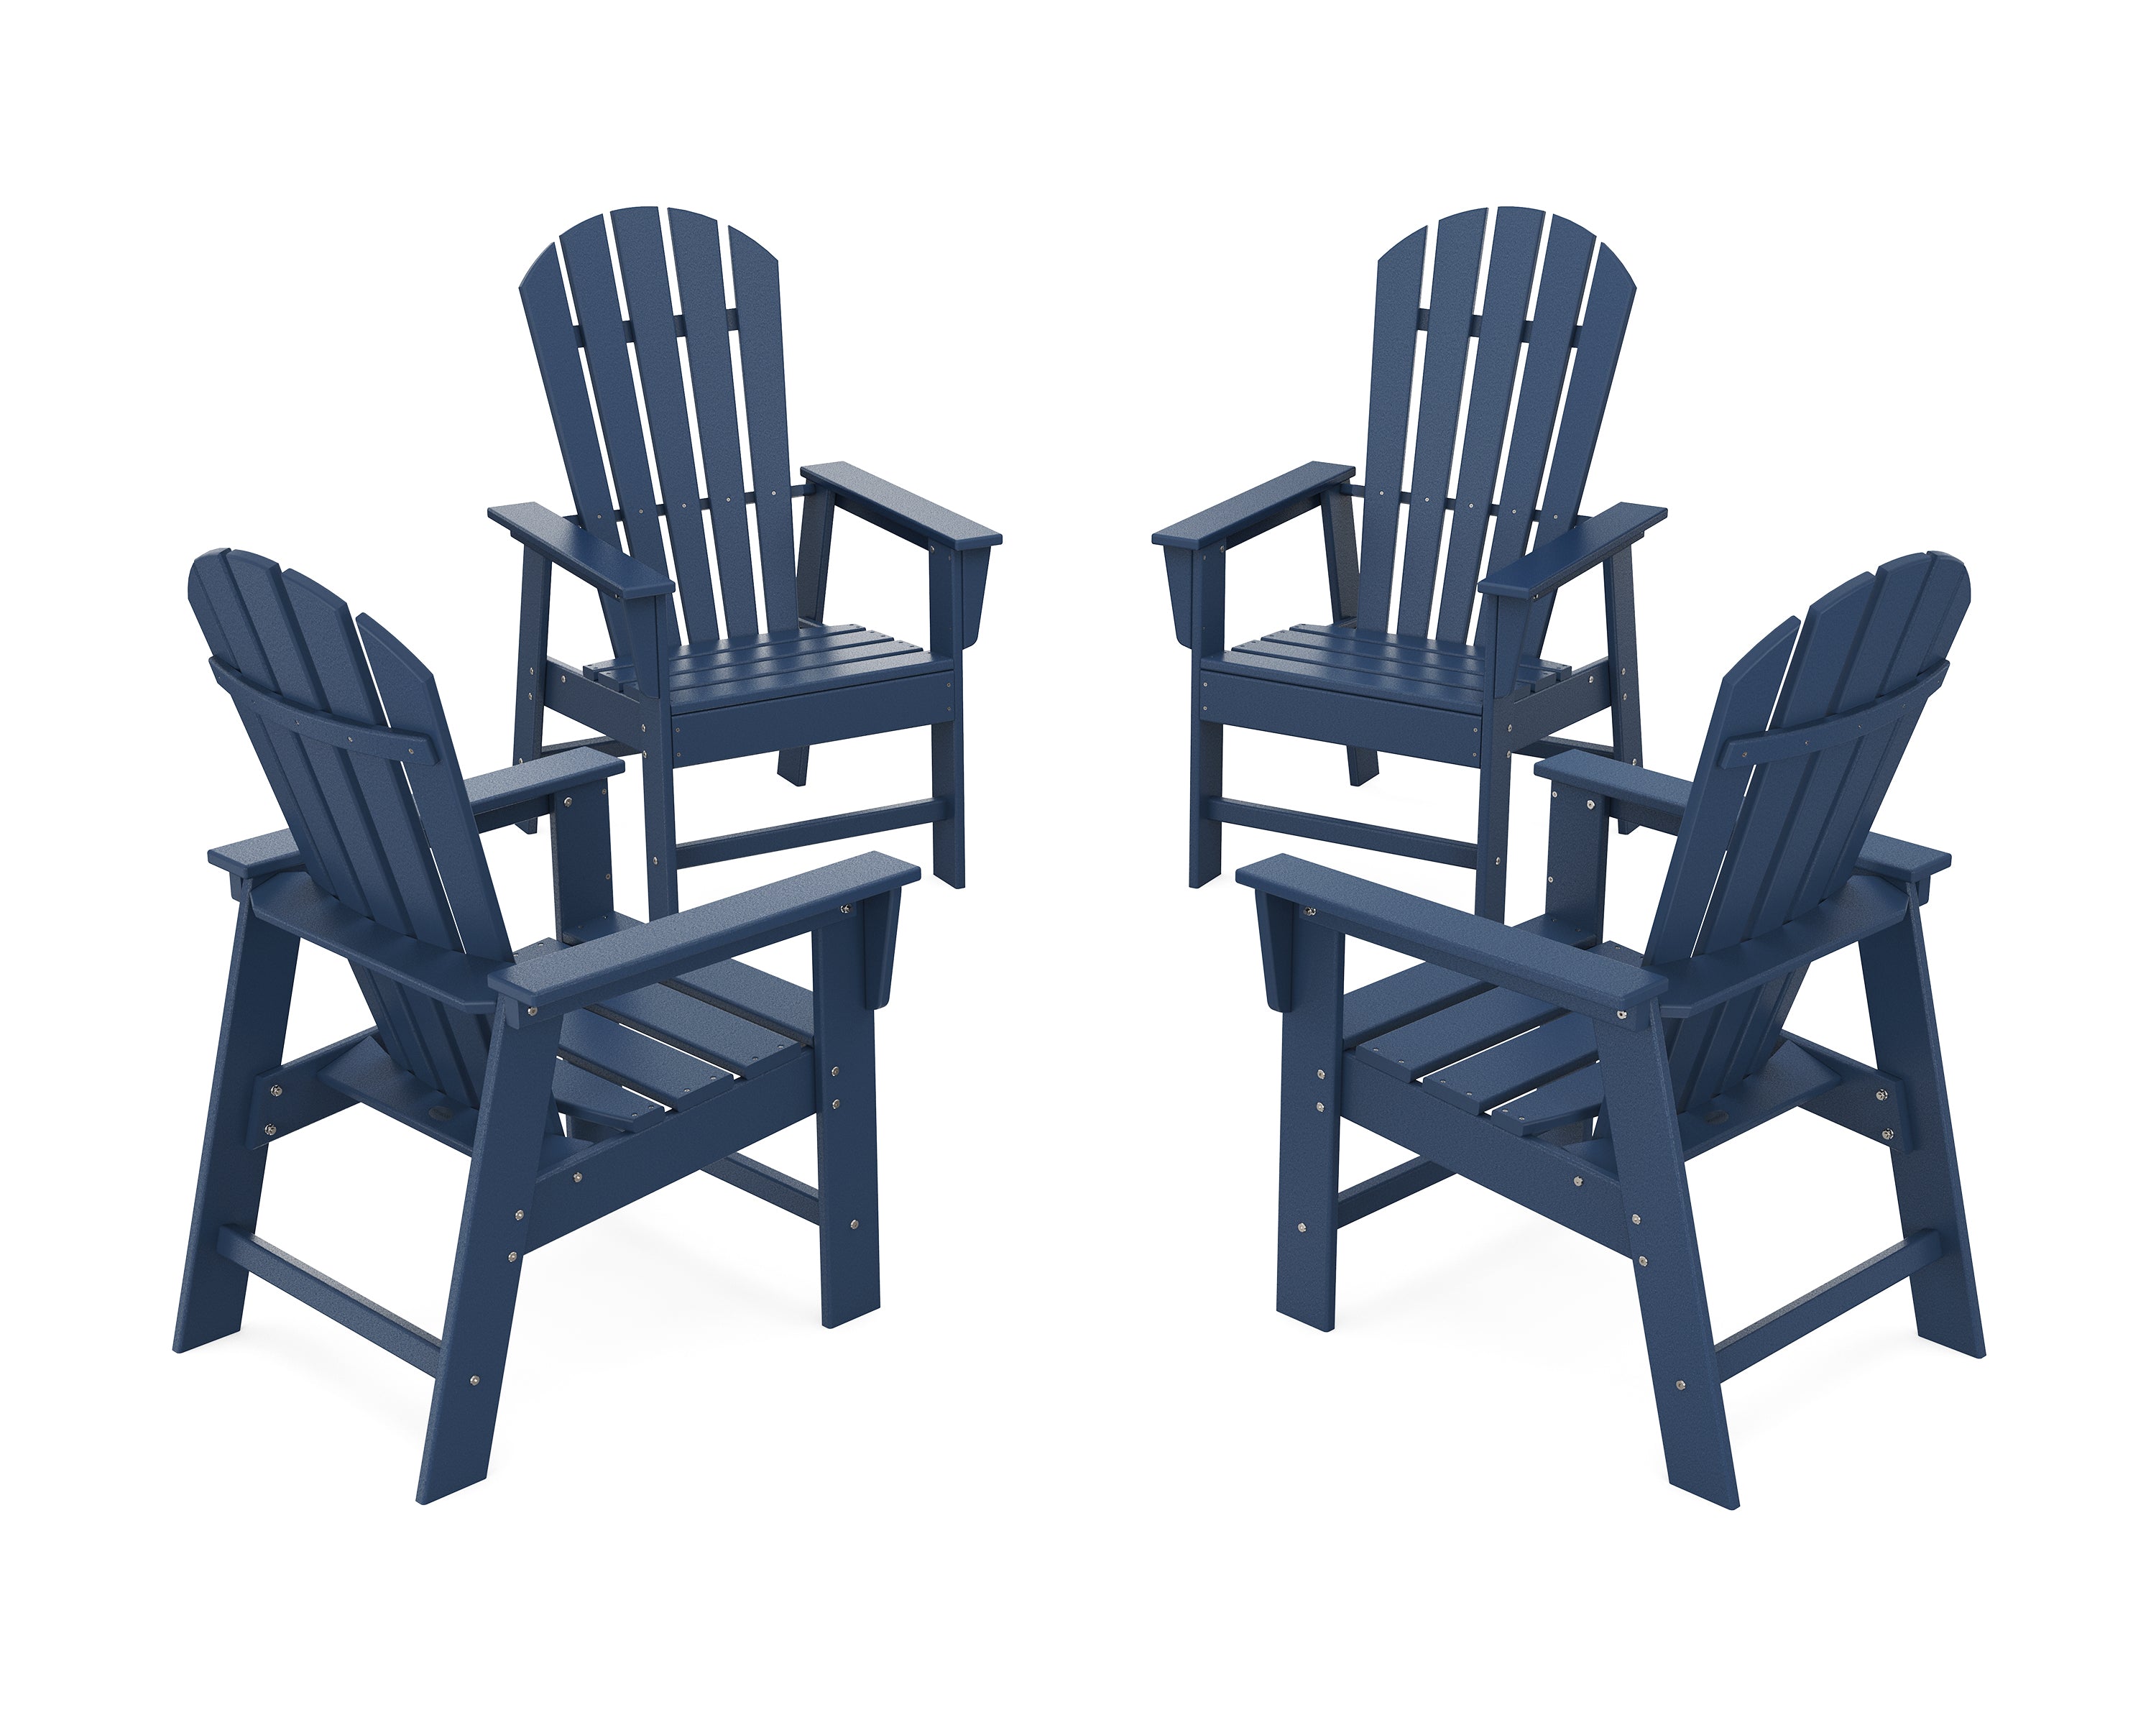 POLYWOOD® 4-Piece South Beach Casual Chair Conversation Set in Navy